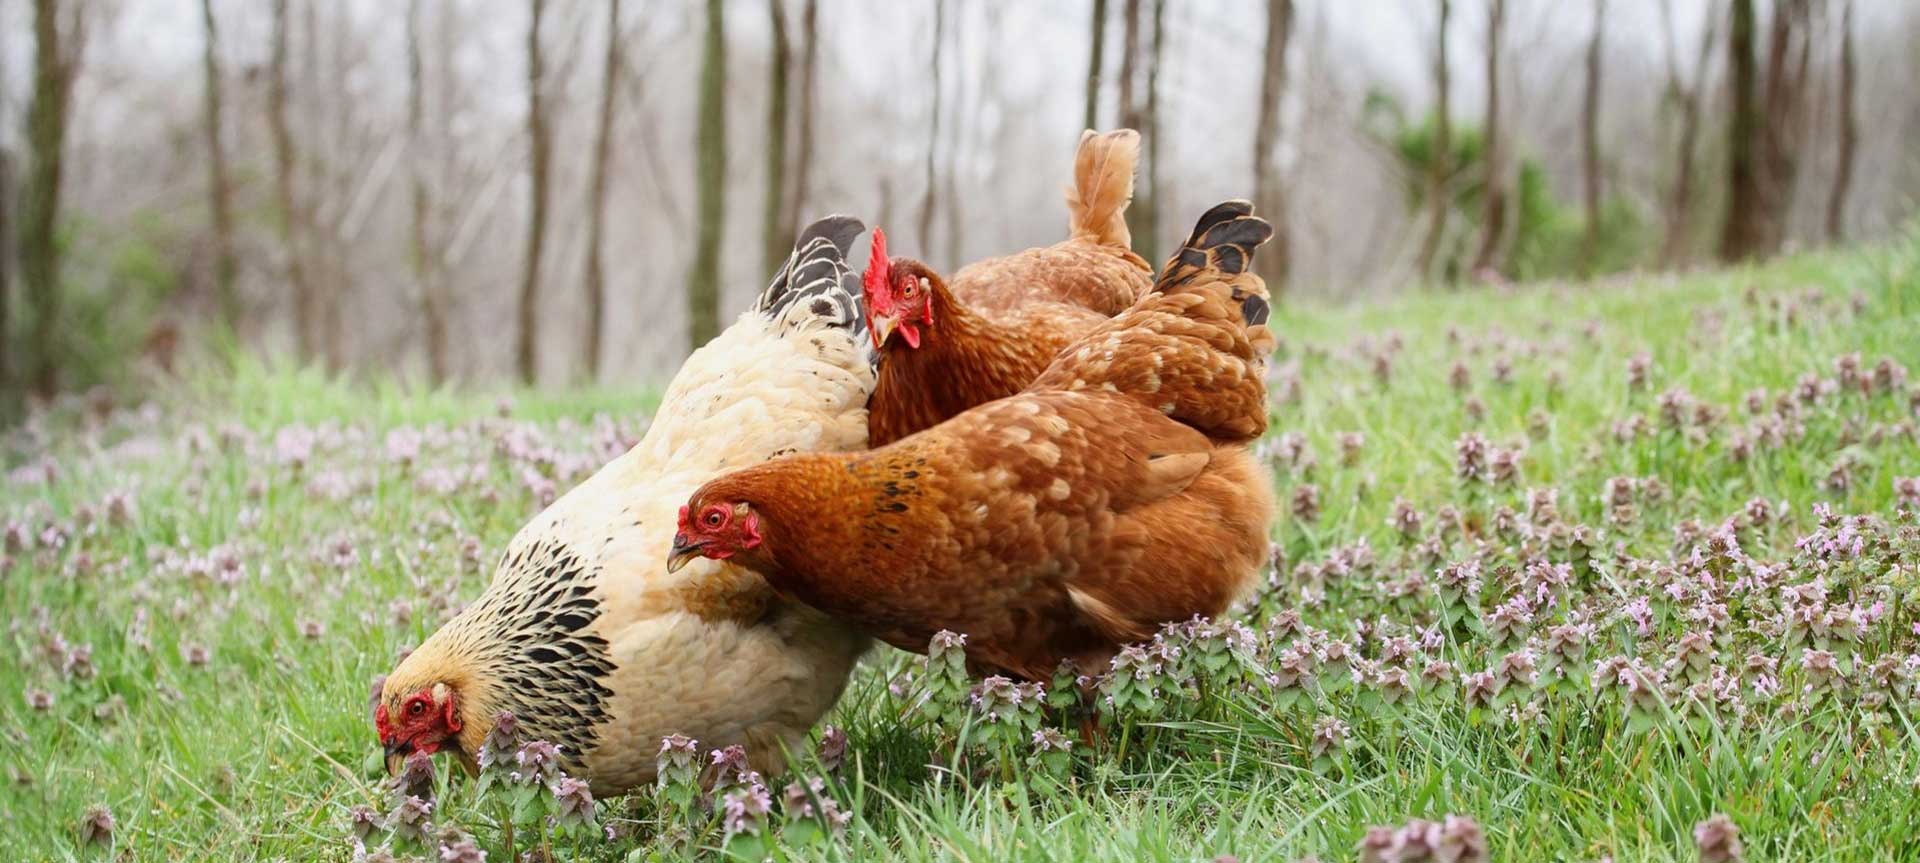 Chickens love to forage for worms and insects